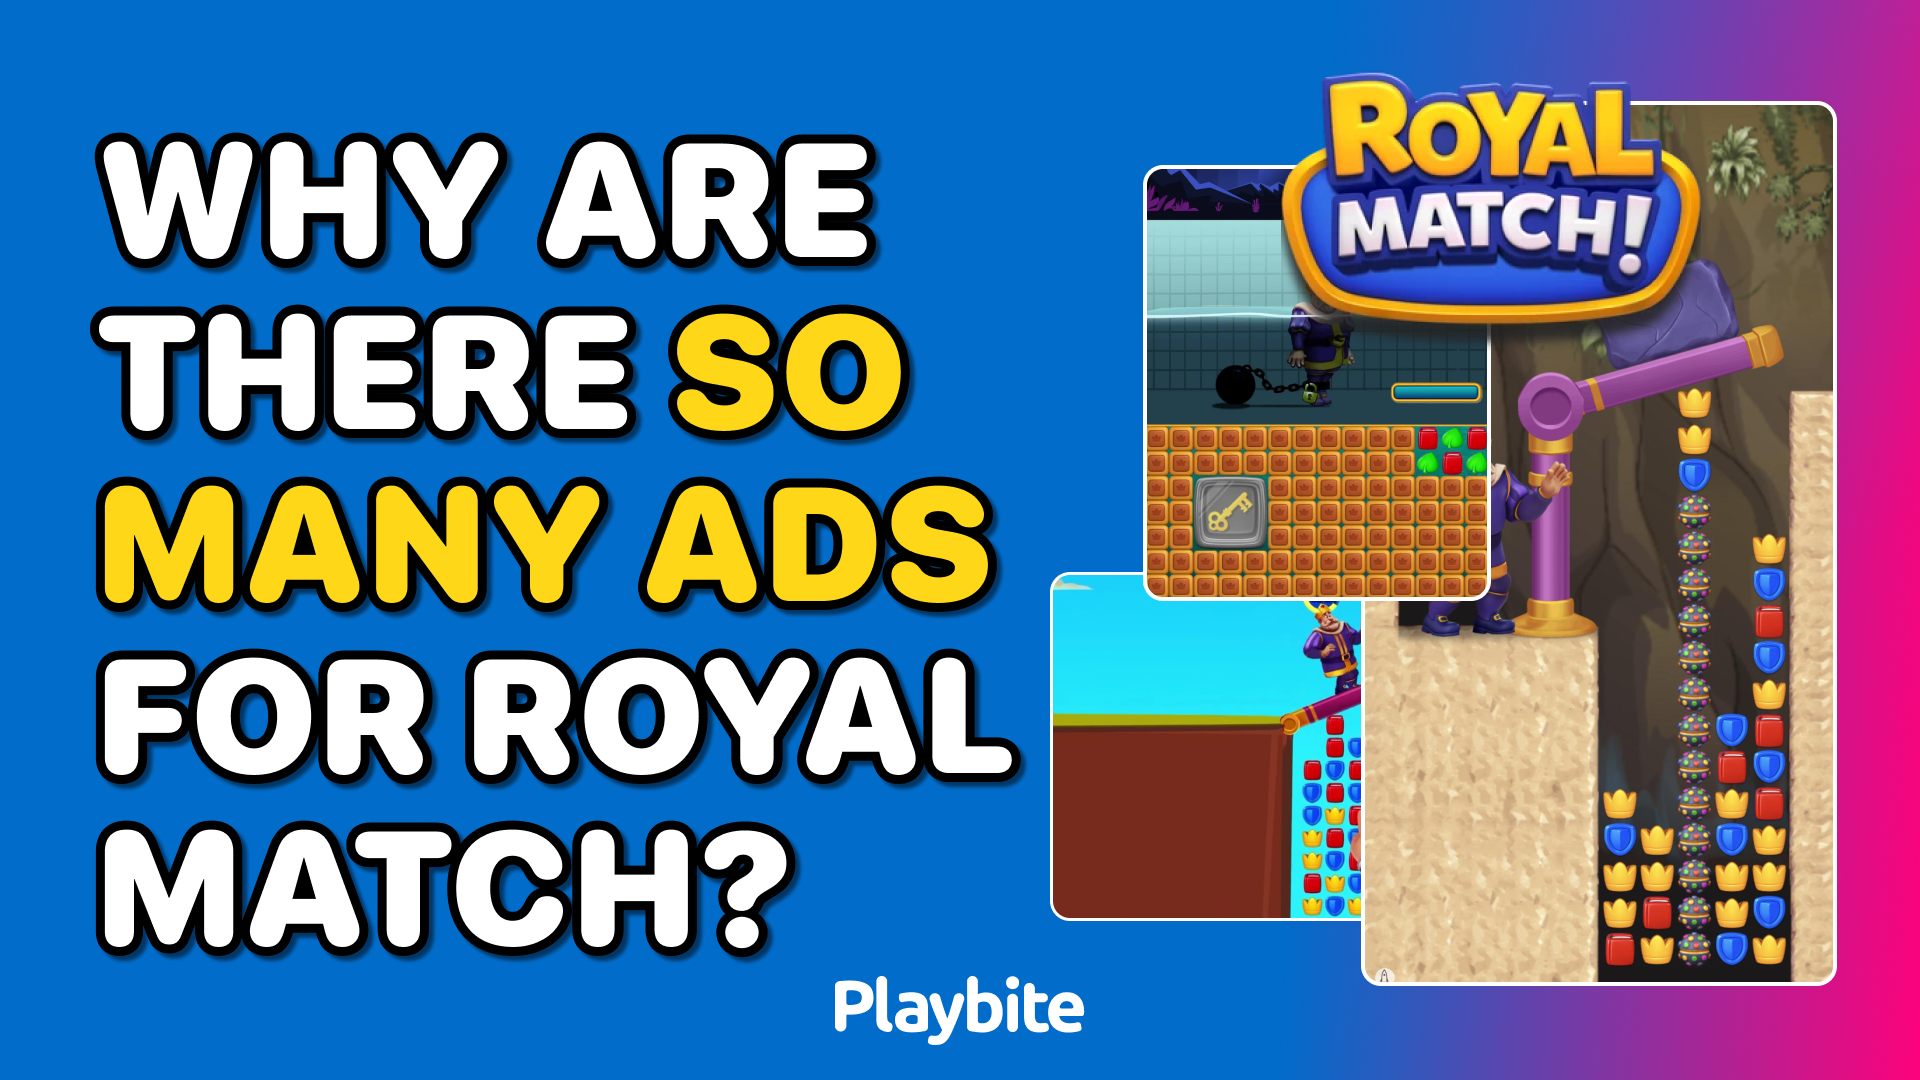 Why Are There So Many Ads For Royal Match?